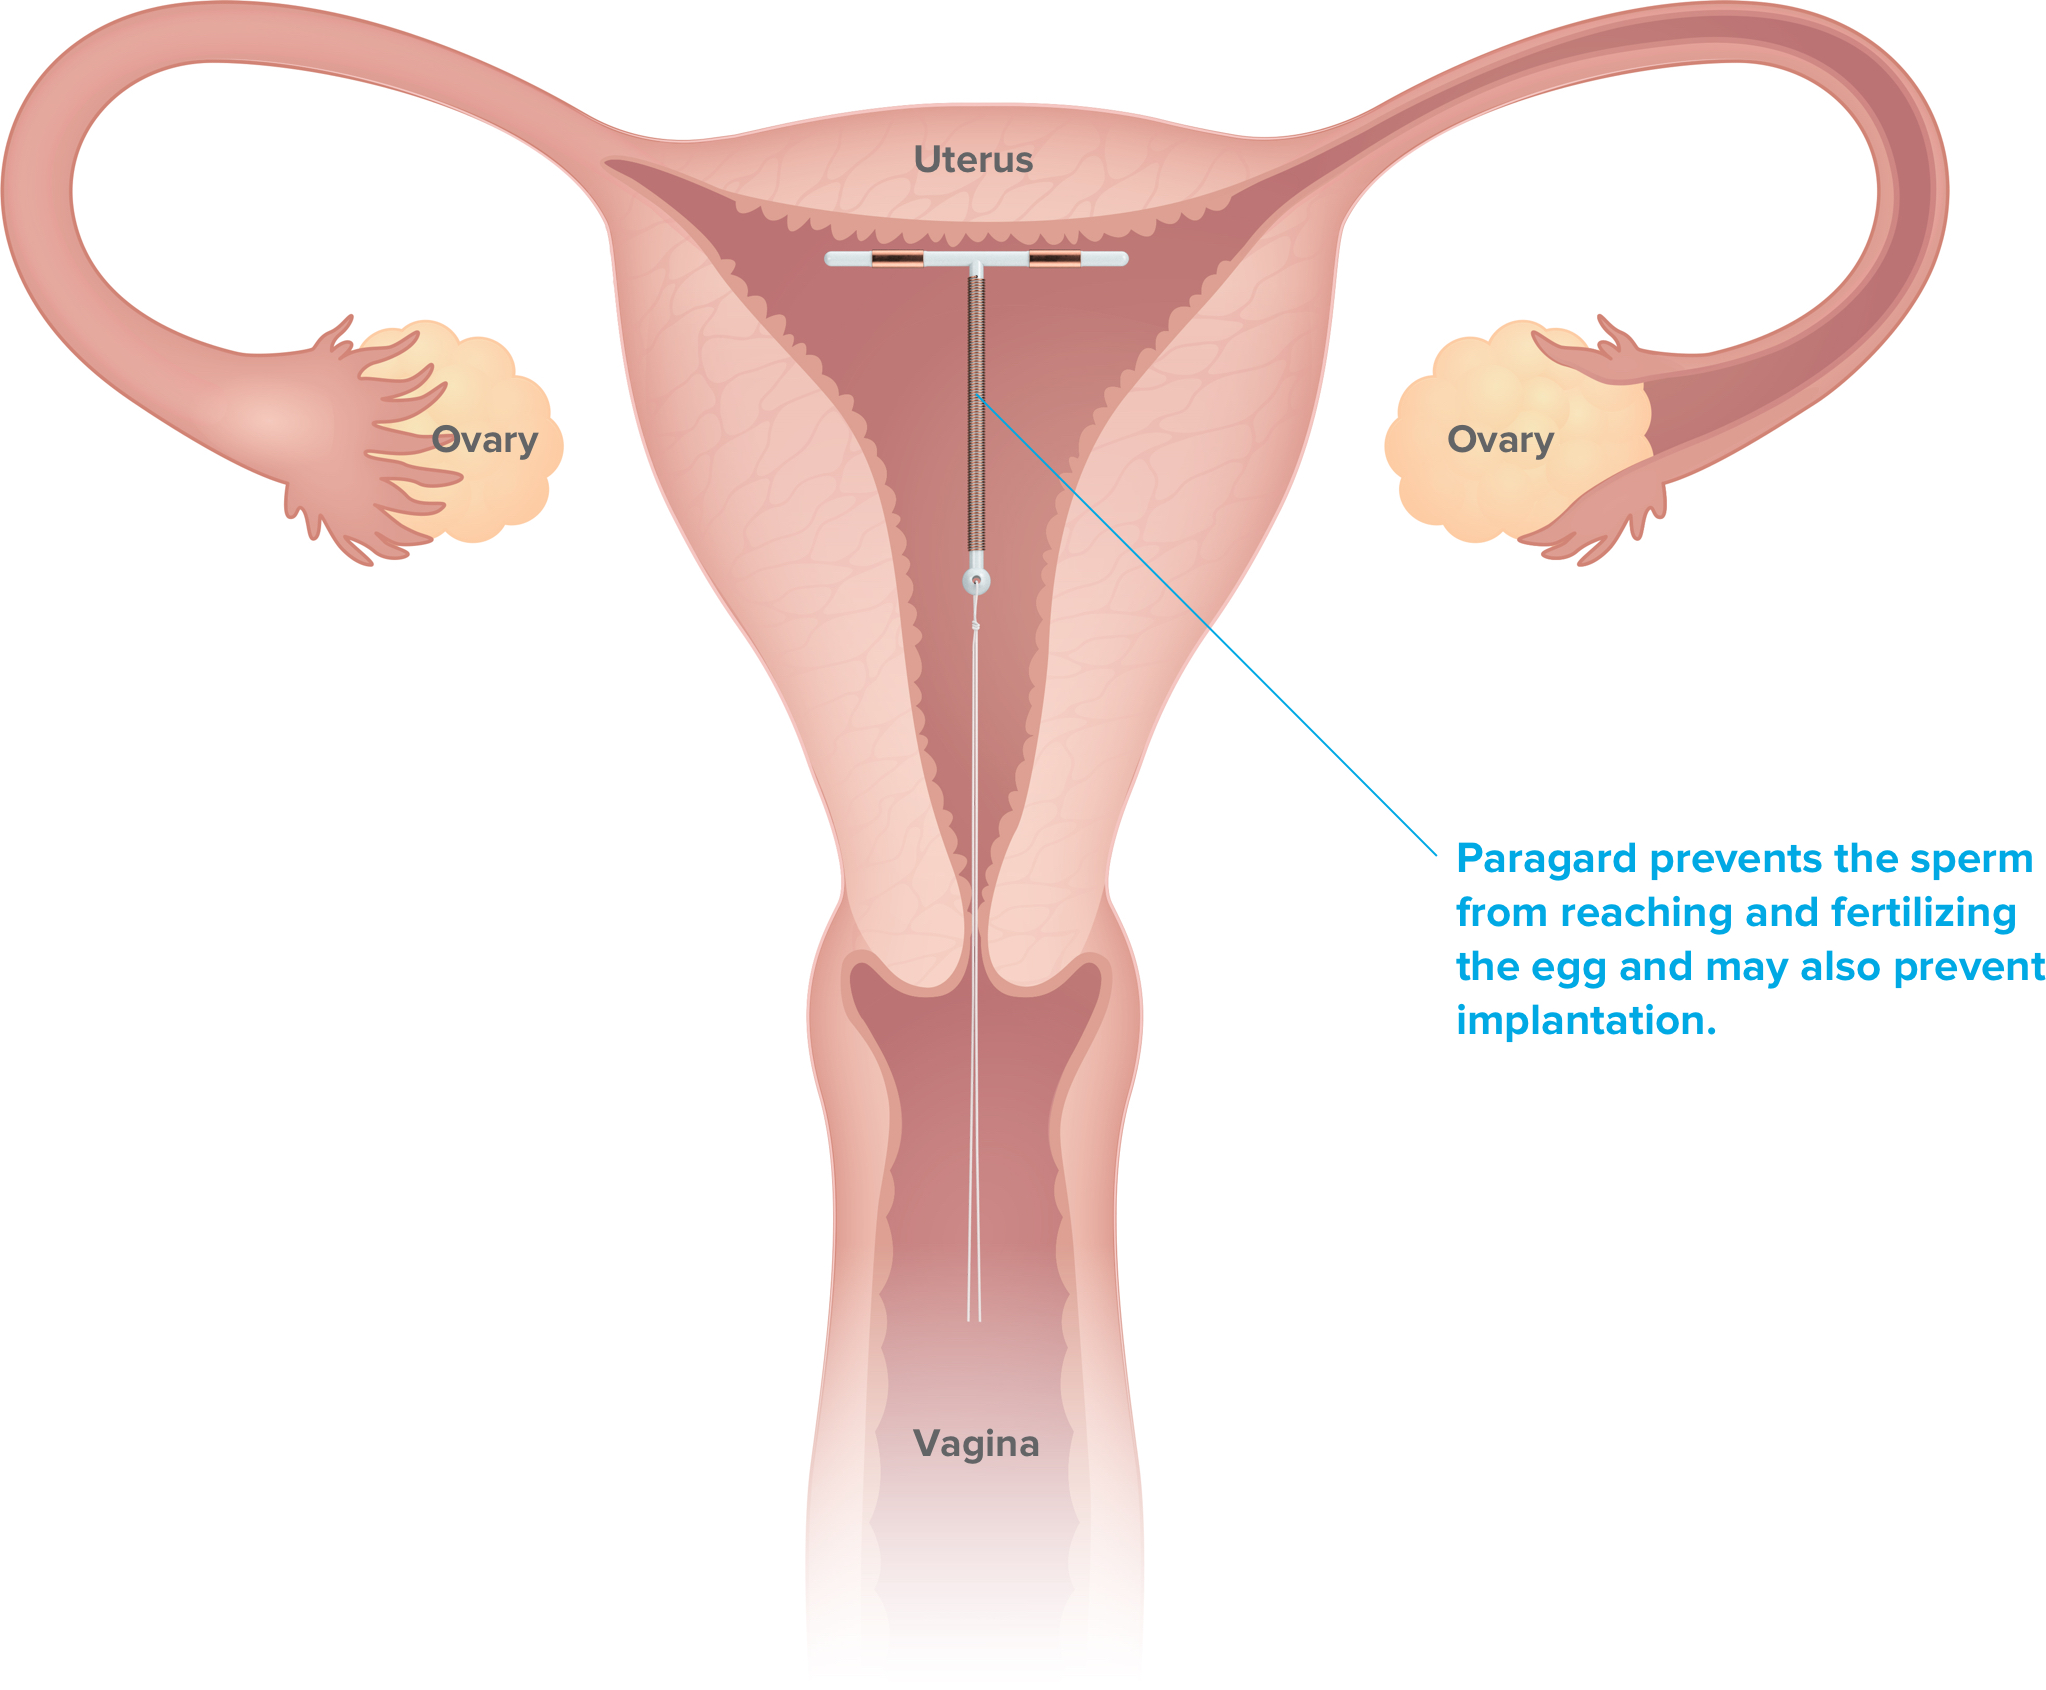 Paragard prevents the sperm from reaching and fertilizing the egg and may also prevent implantation.